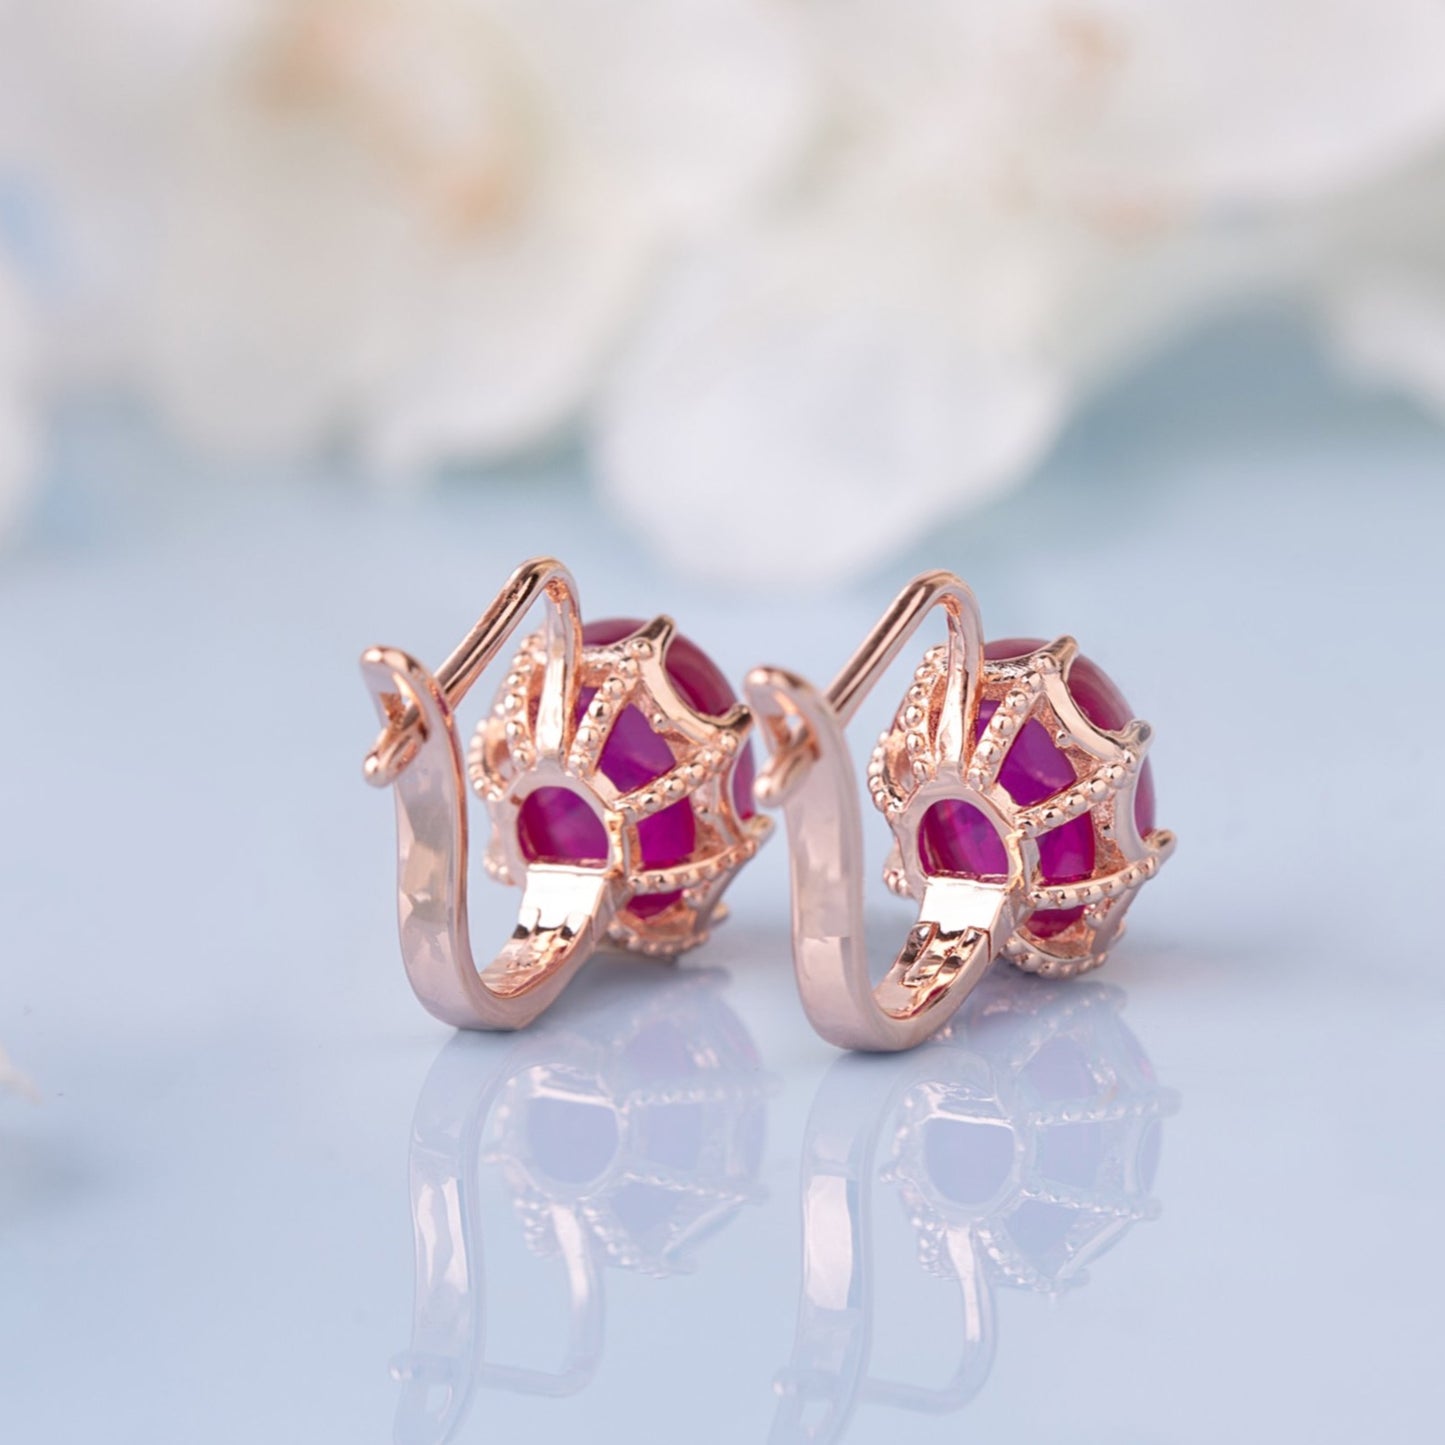 Two Red Ruby vintage earrings from the behind